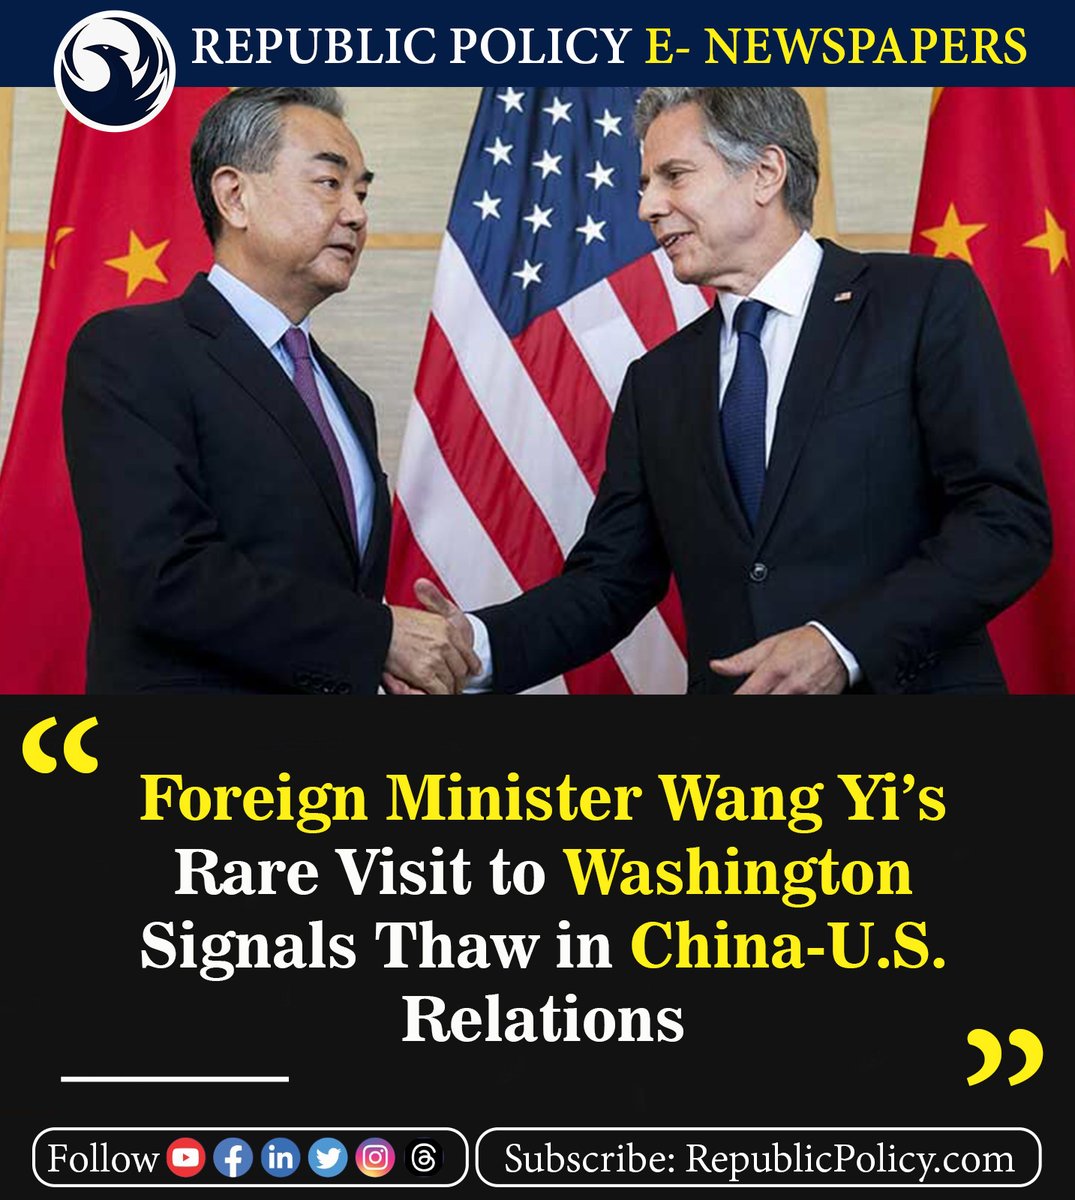 China’s top diplomat is commencing discussions on Thursday in Washington.

Read more: republicpolicy.com/foreign-minist…

#ChinaUSRelations #WangYiVisit #Diplomacy #BilateralRelations #News